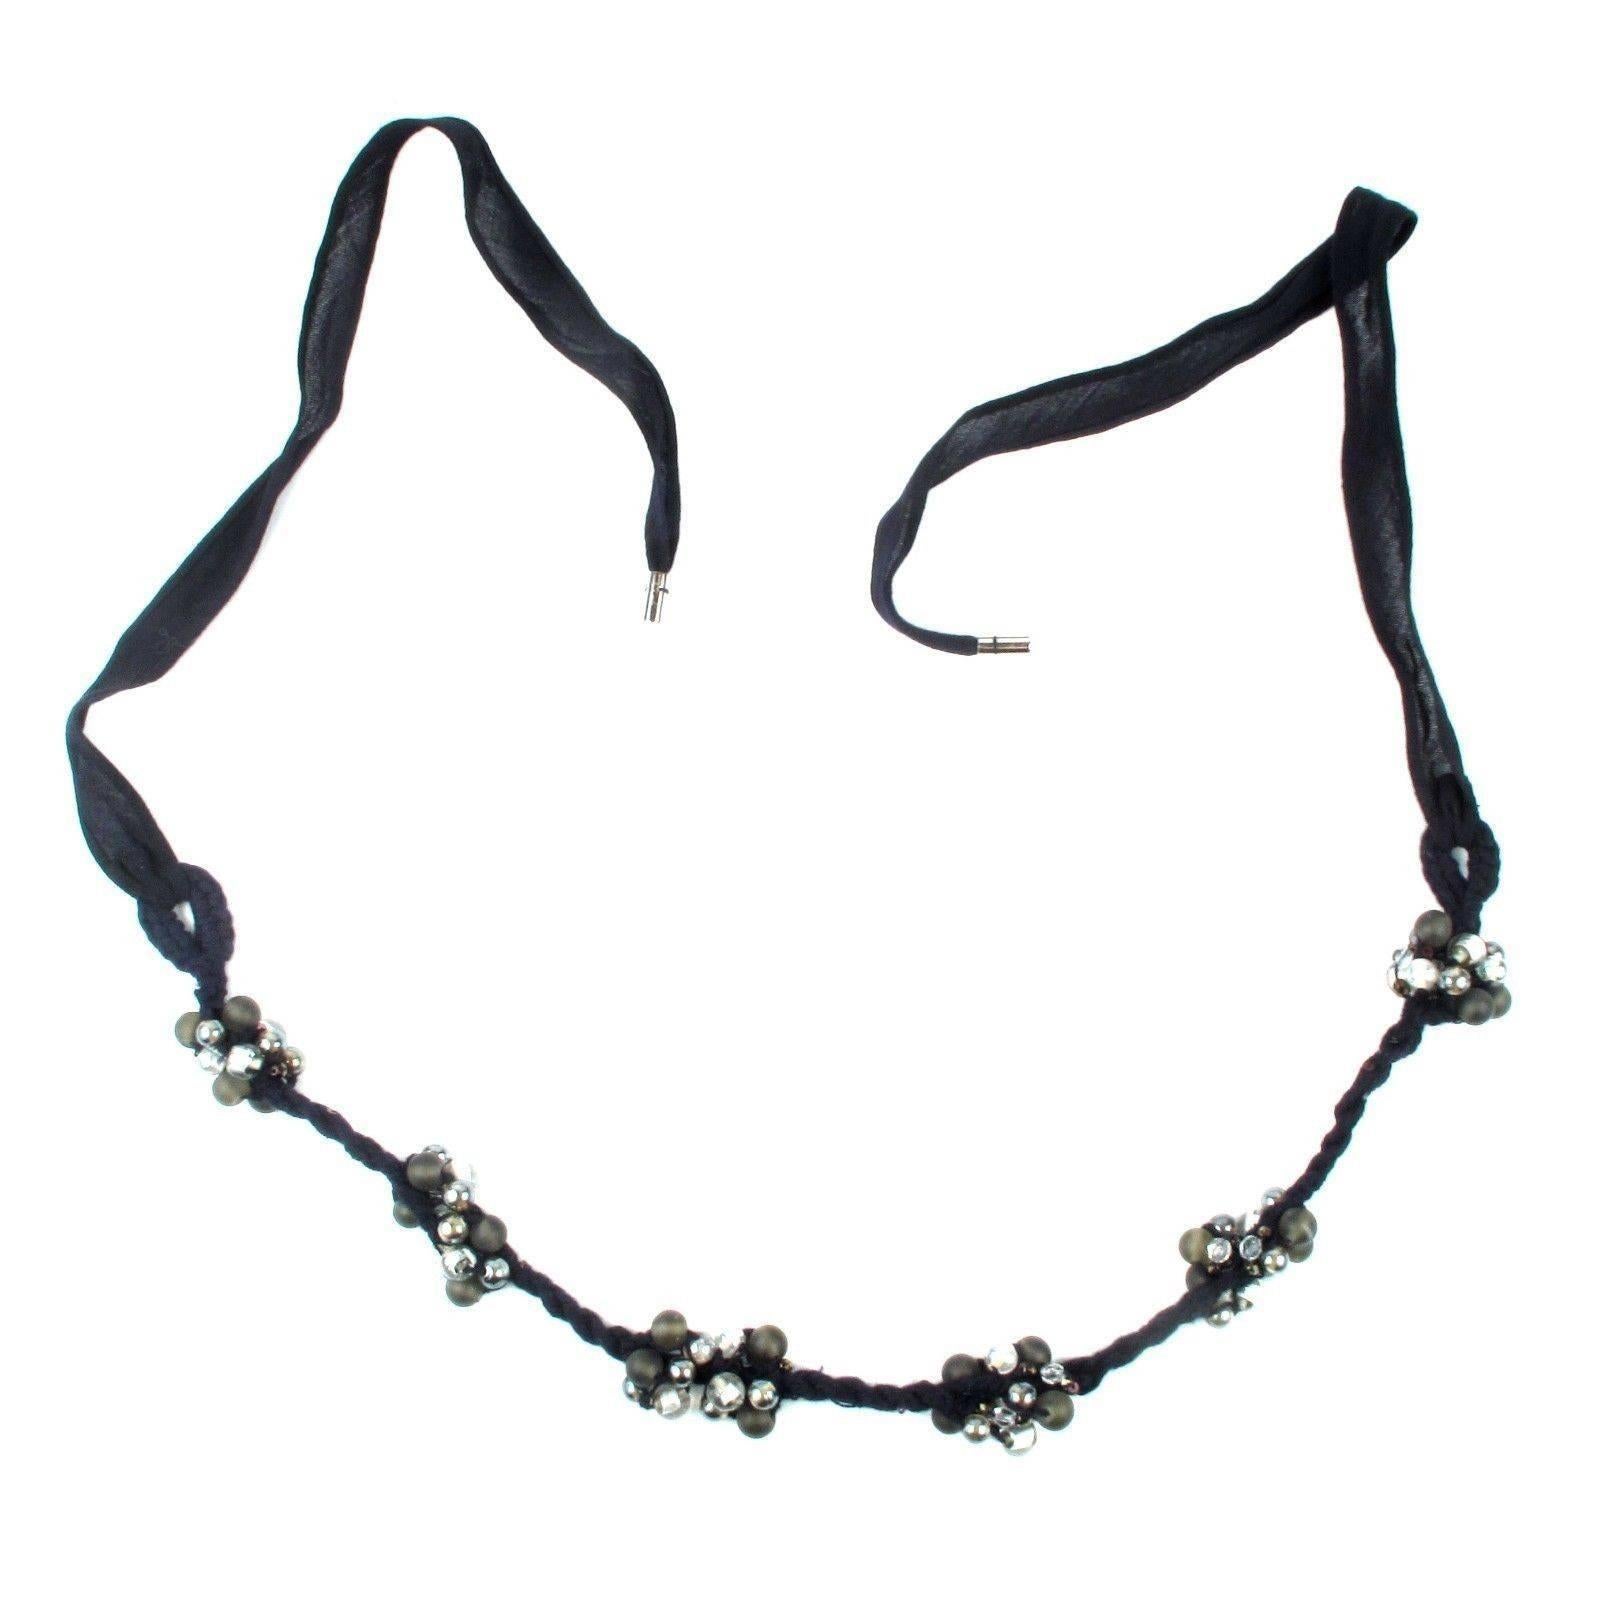 BRAND NEW:

Brunello Cucinelli - Beaded Cluster Necklace

Color: Black

Material: Rope / Beaded

------------------------------------------------------------

Details:

- beaded clusters throughout

- adjustable tie closure 

- item